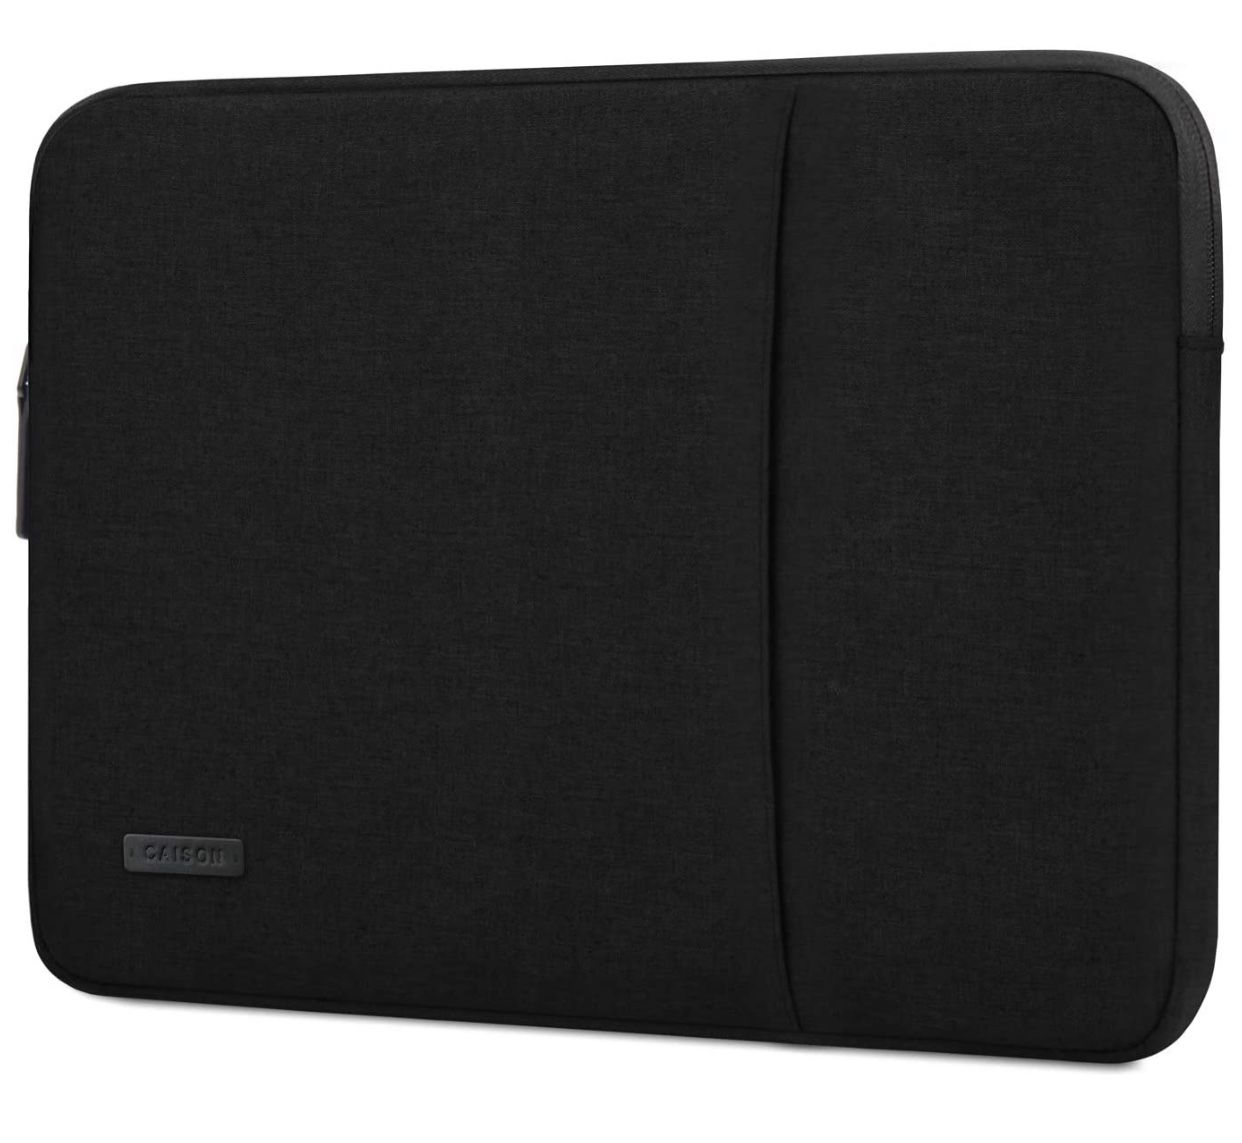 CAISON 14-15.6 inch Laptop Sleeve Case for iPad/Surface Pro I1-B1